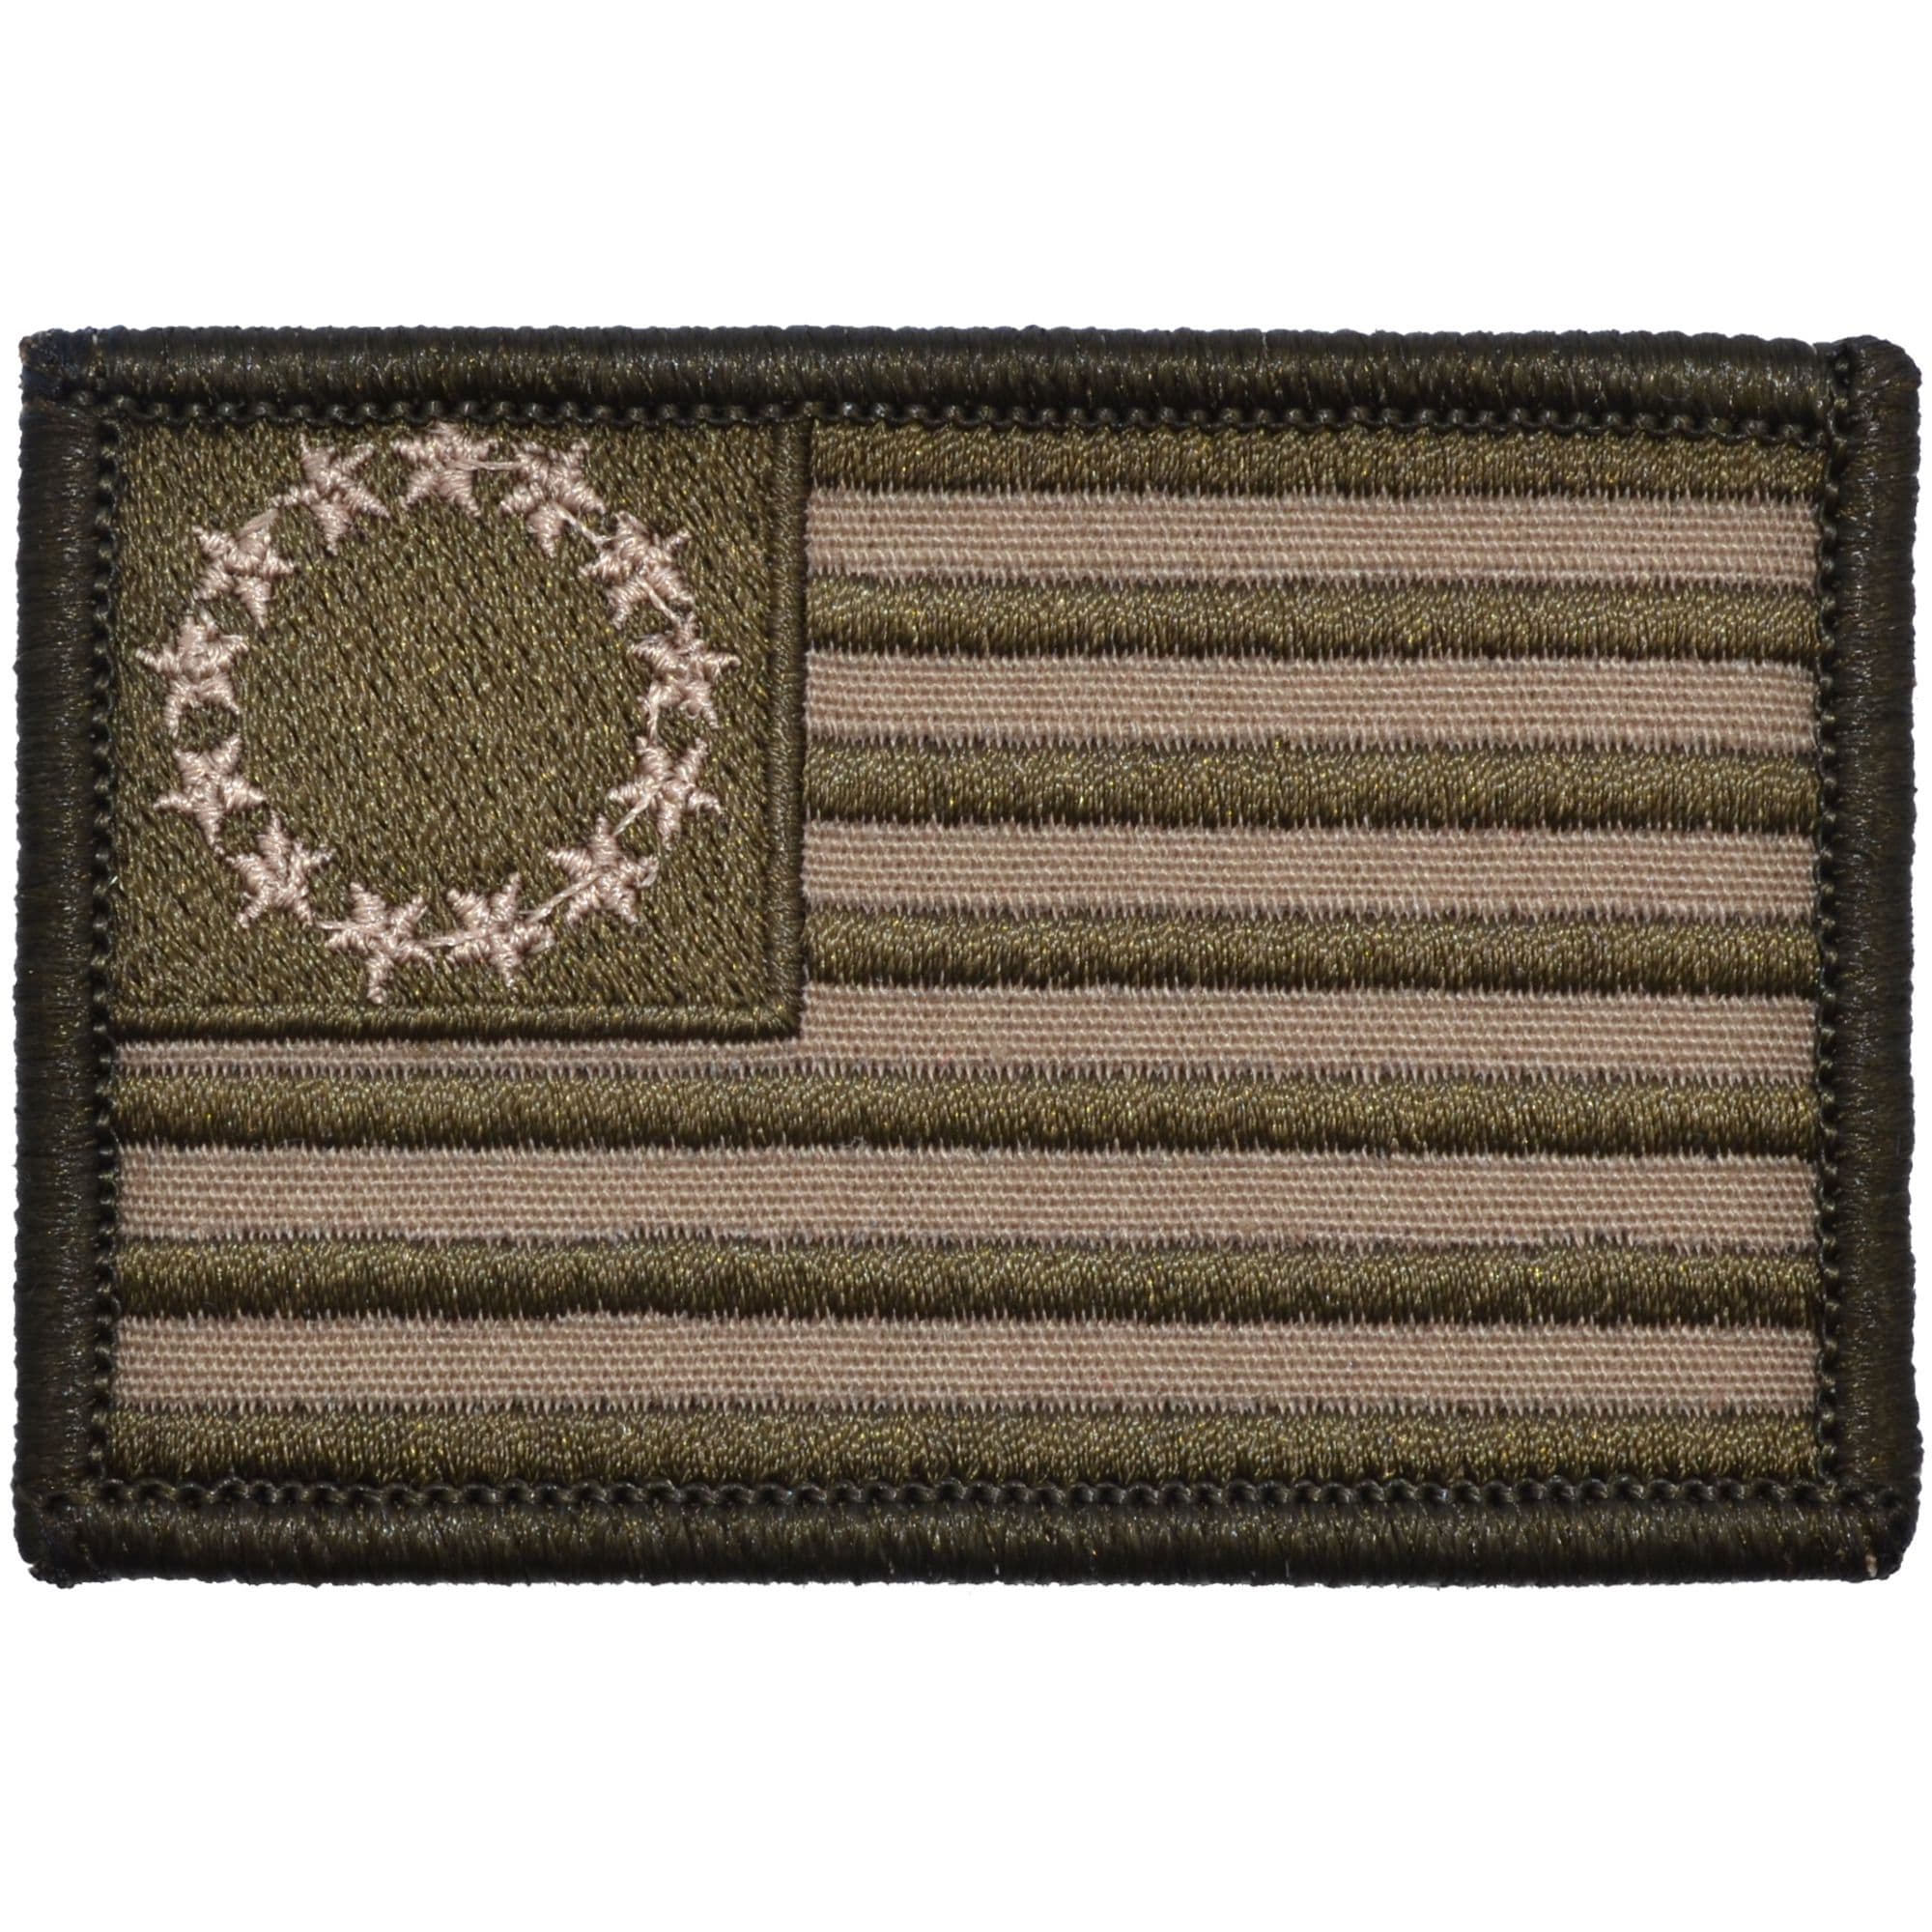 Tactical Gear Junkie Patches Coyote Brown Betsy Ross Flag - 2x3 Patch